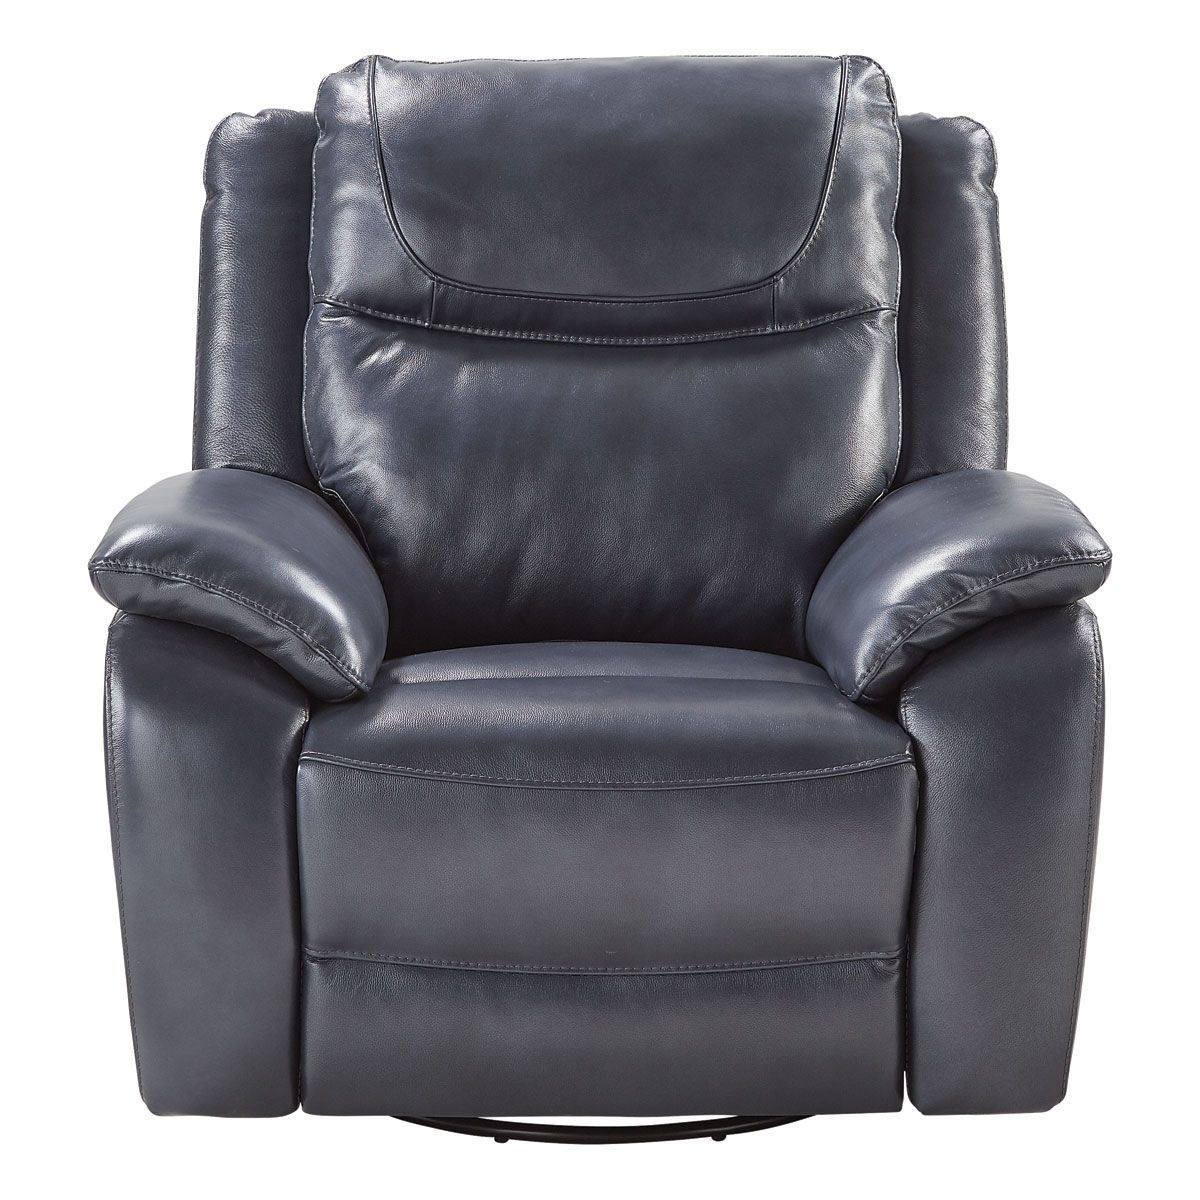 Picture of LENNOX LEATHER TRIPLE POWER SWIVEL GLIDER RECLINER